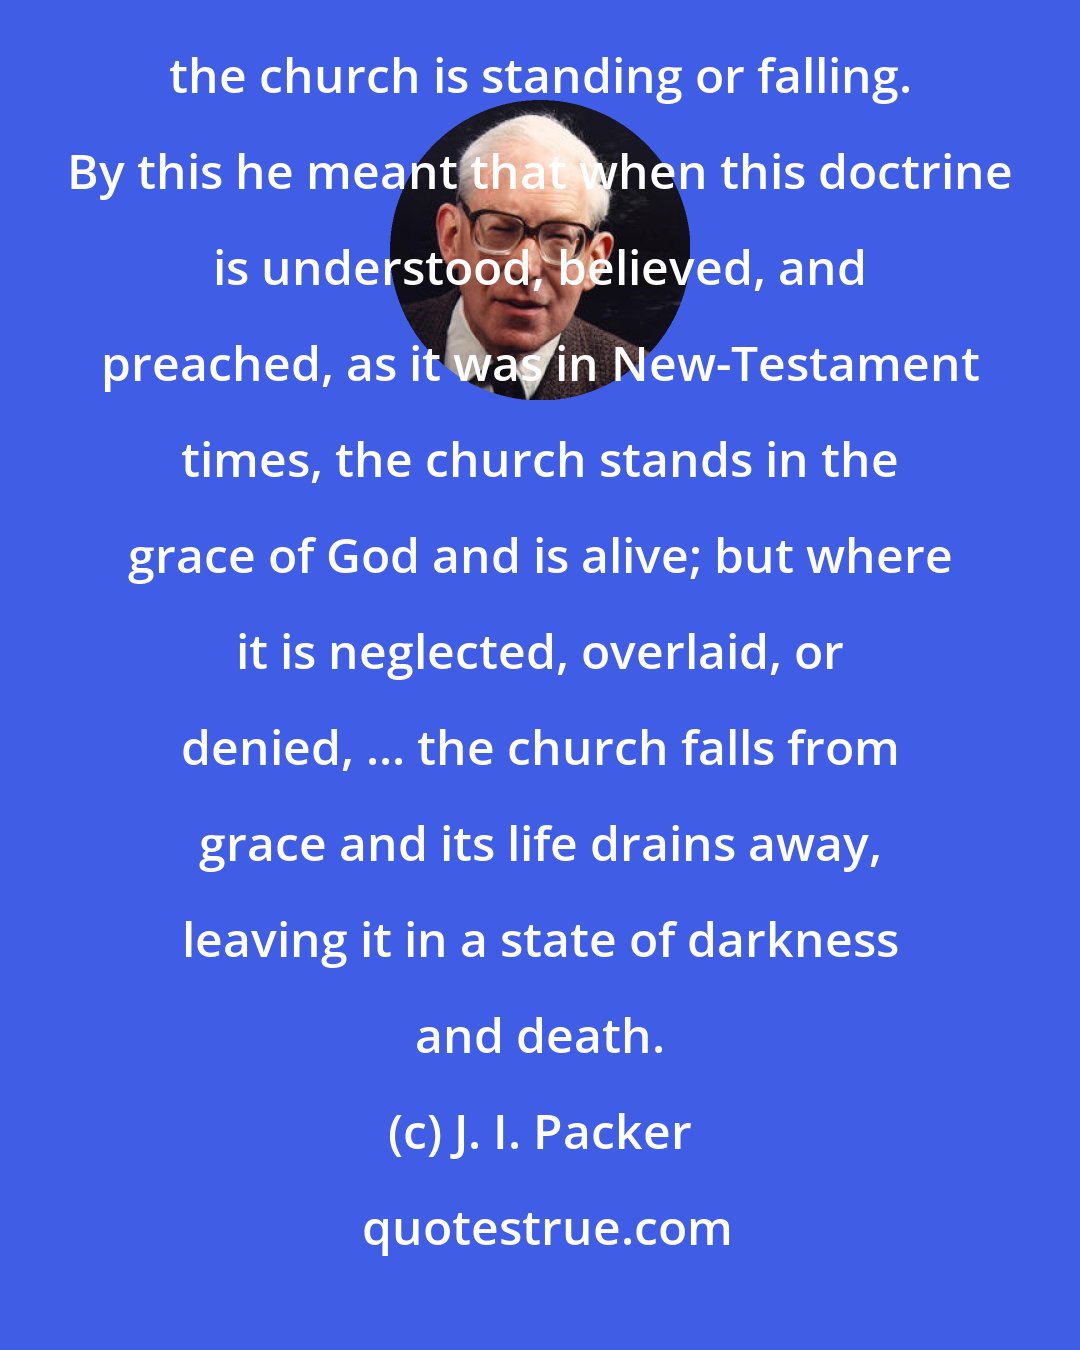 J. I. Packer: Martin Luther described the doctrine of justification by faith as the article of faith that decides whether the church is standing or falling. By this he meant that when this doctrine is understood, believed, and preached, as it was in New-Testament times, the church stands in the grace of God and is alive; but where it is neglected, overlaid, or denied, ... the church falls from grace and its life drains away, leaving it in a state of darkness and death.